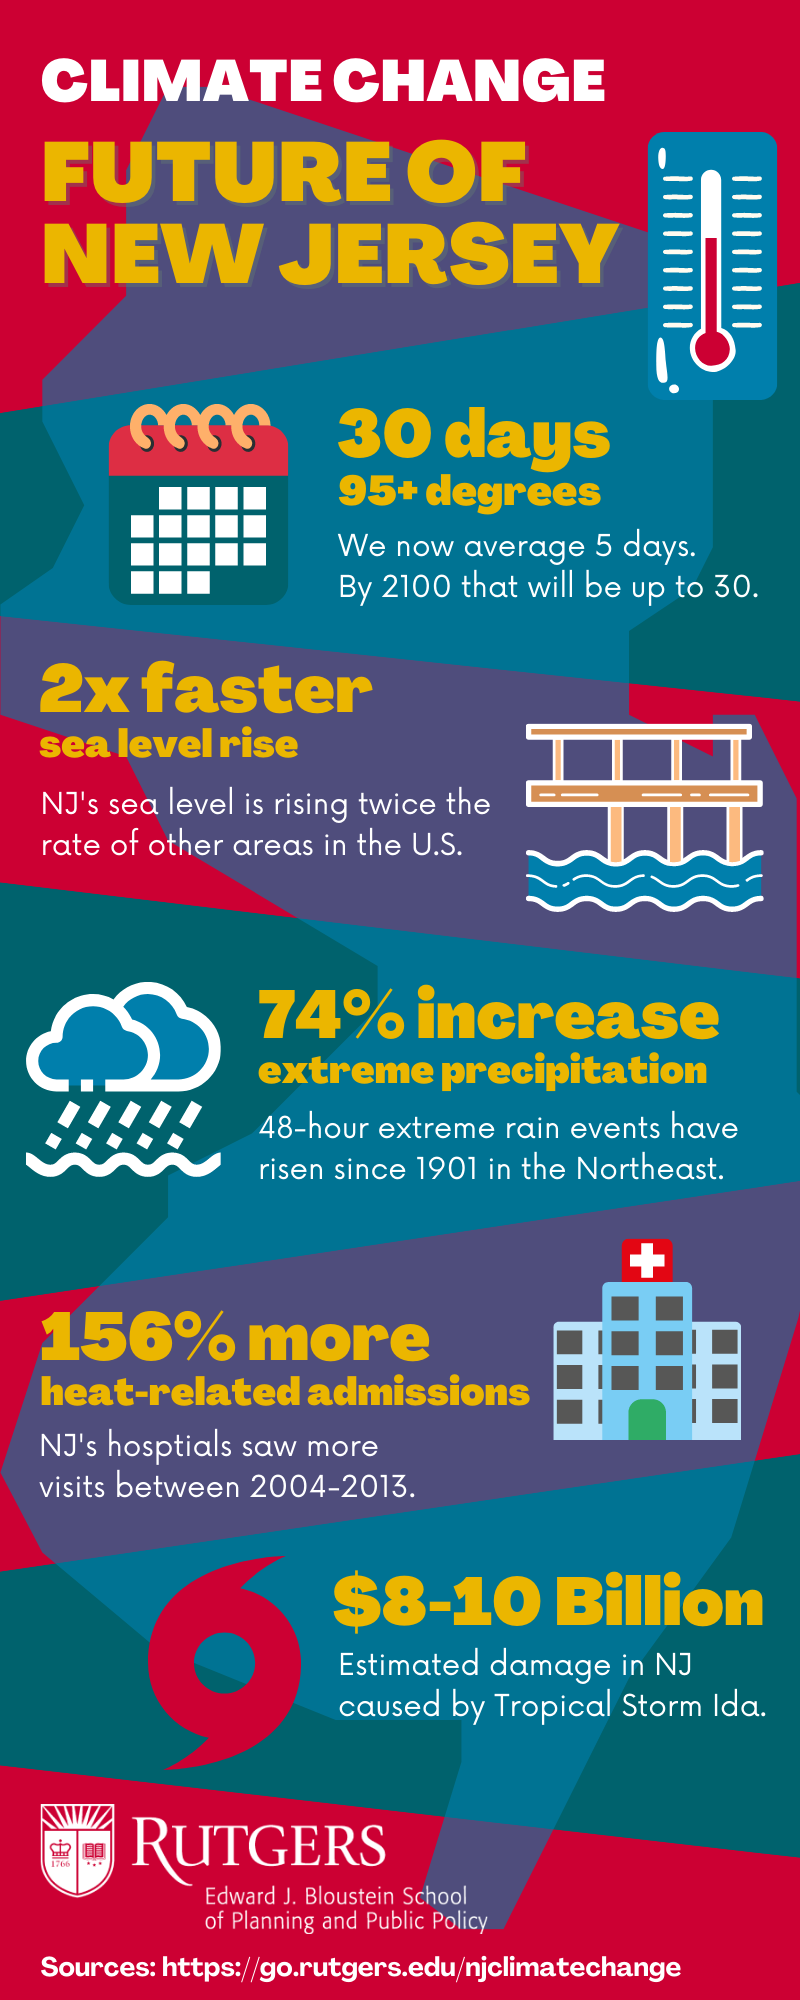 Climate Change - Future of New Jersey Infographic